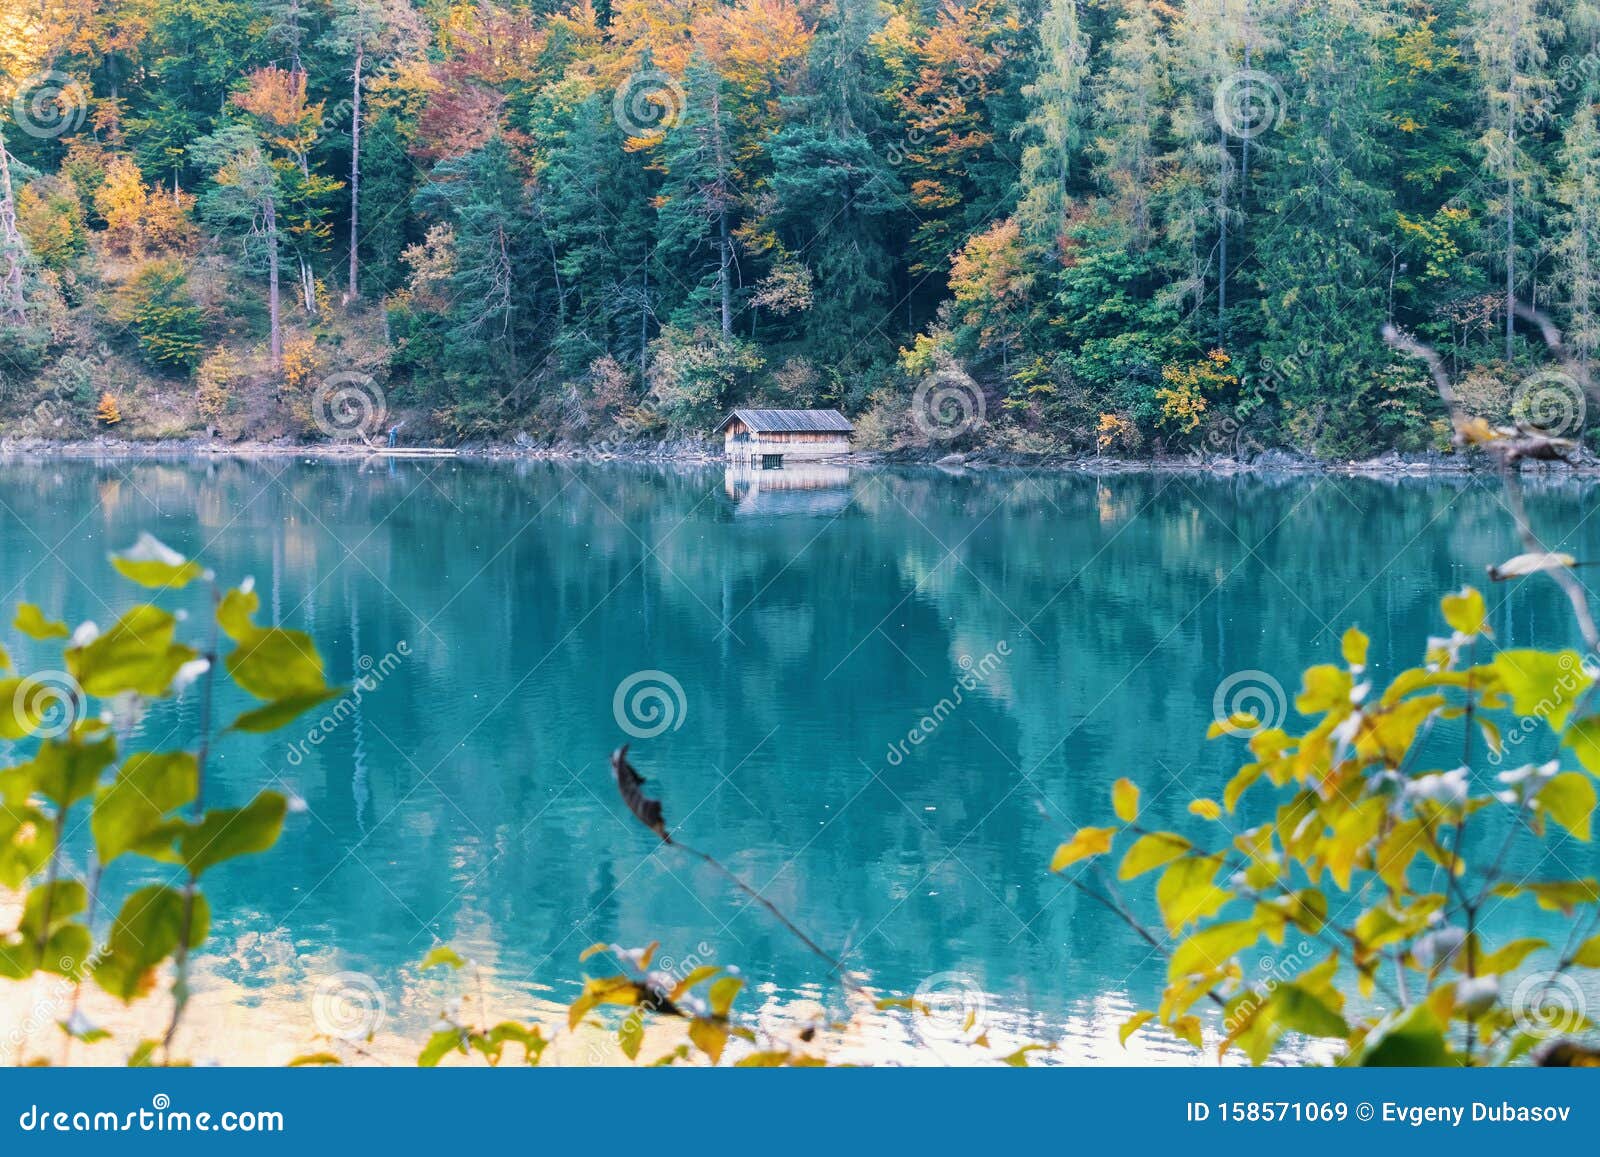 Cabin On The Lake In The Autumn Forest In The Mountains Stock Image - Image  of vacation, blue: 158571069